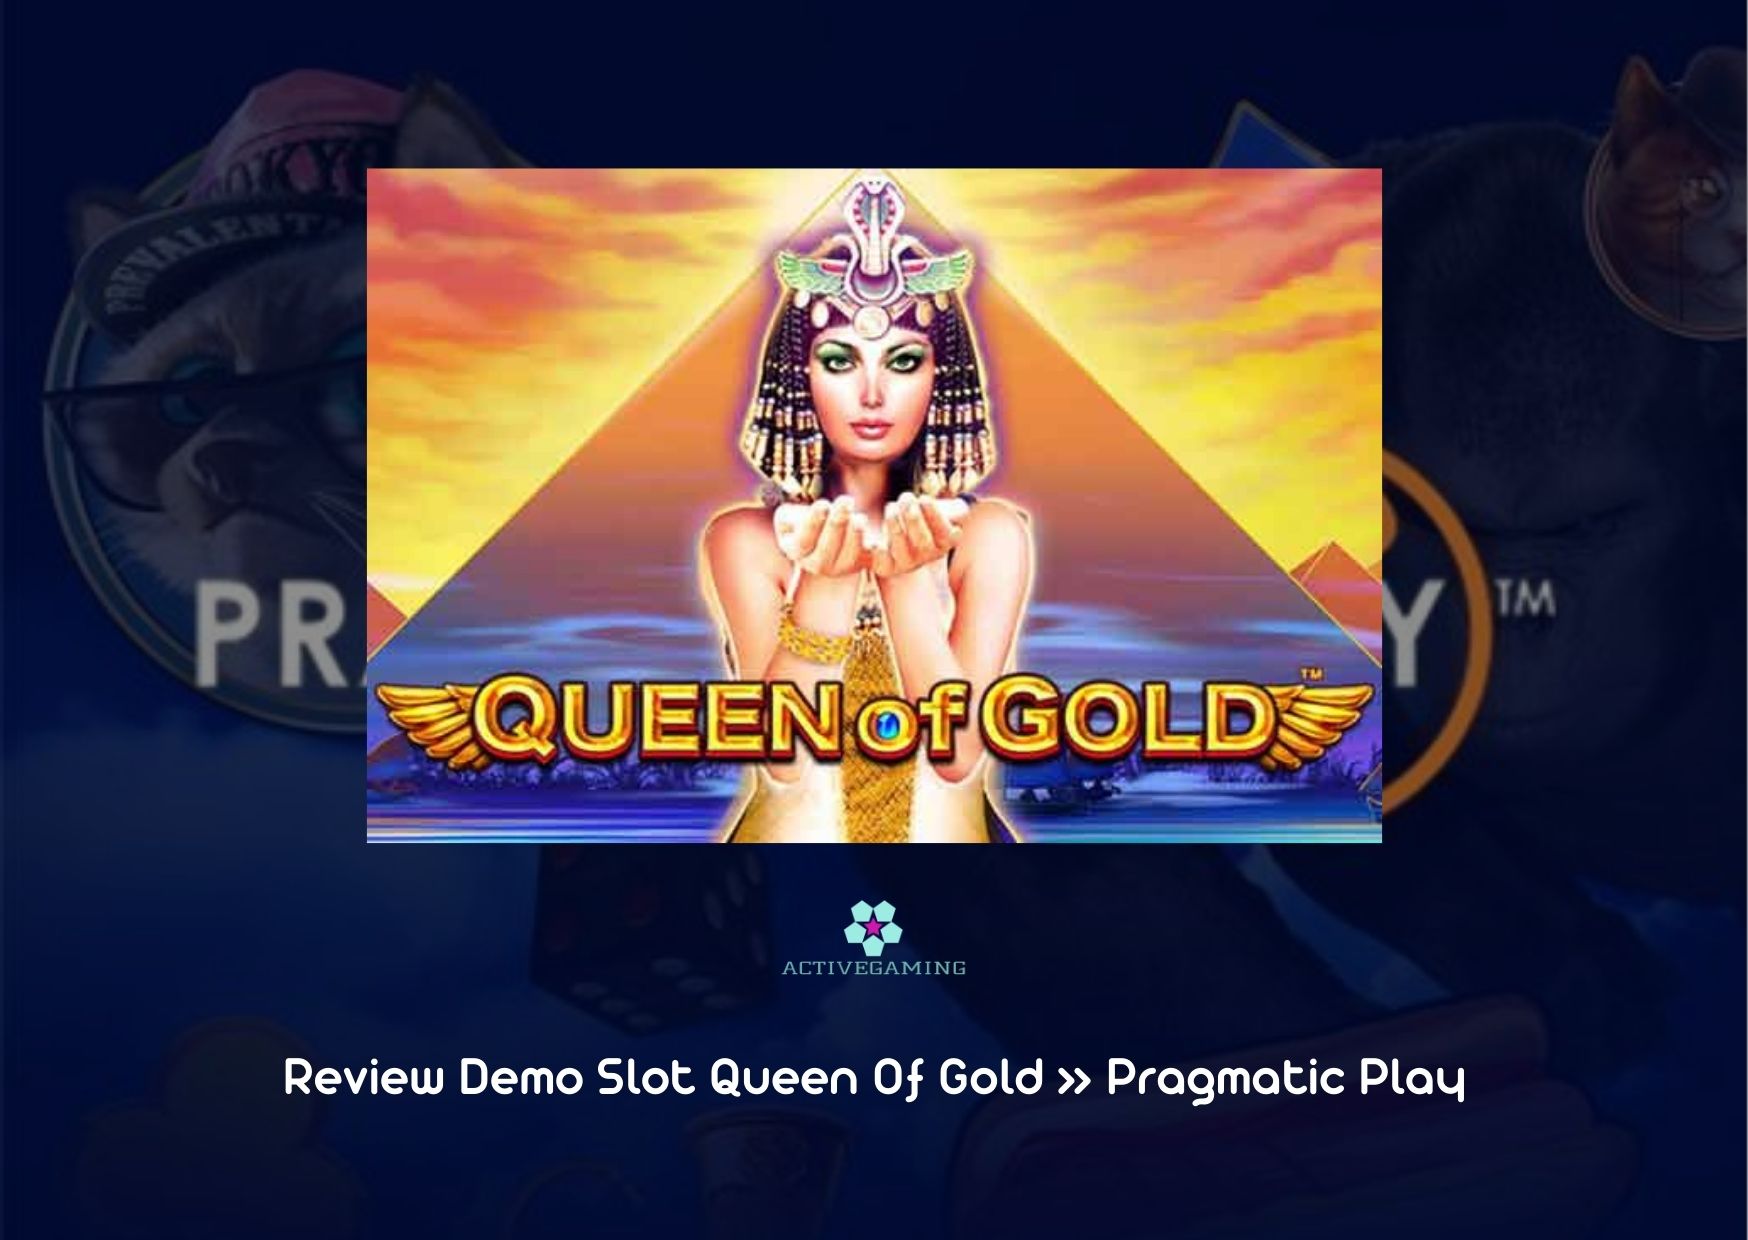 Review Demo Slot Queen Of Gold » Pragmatic Play